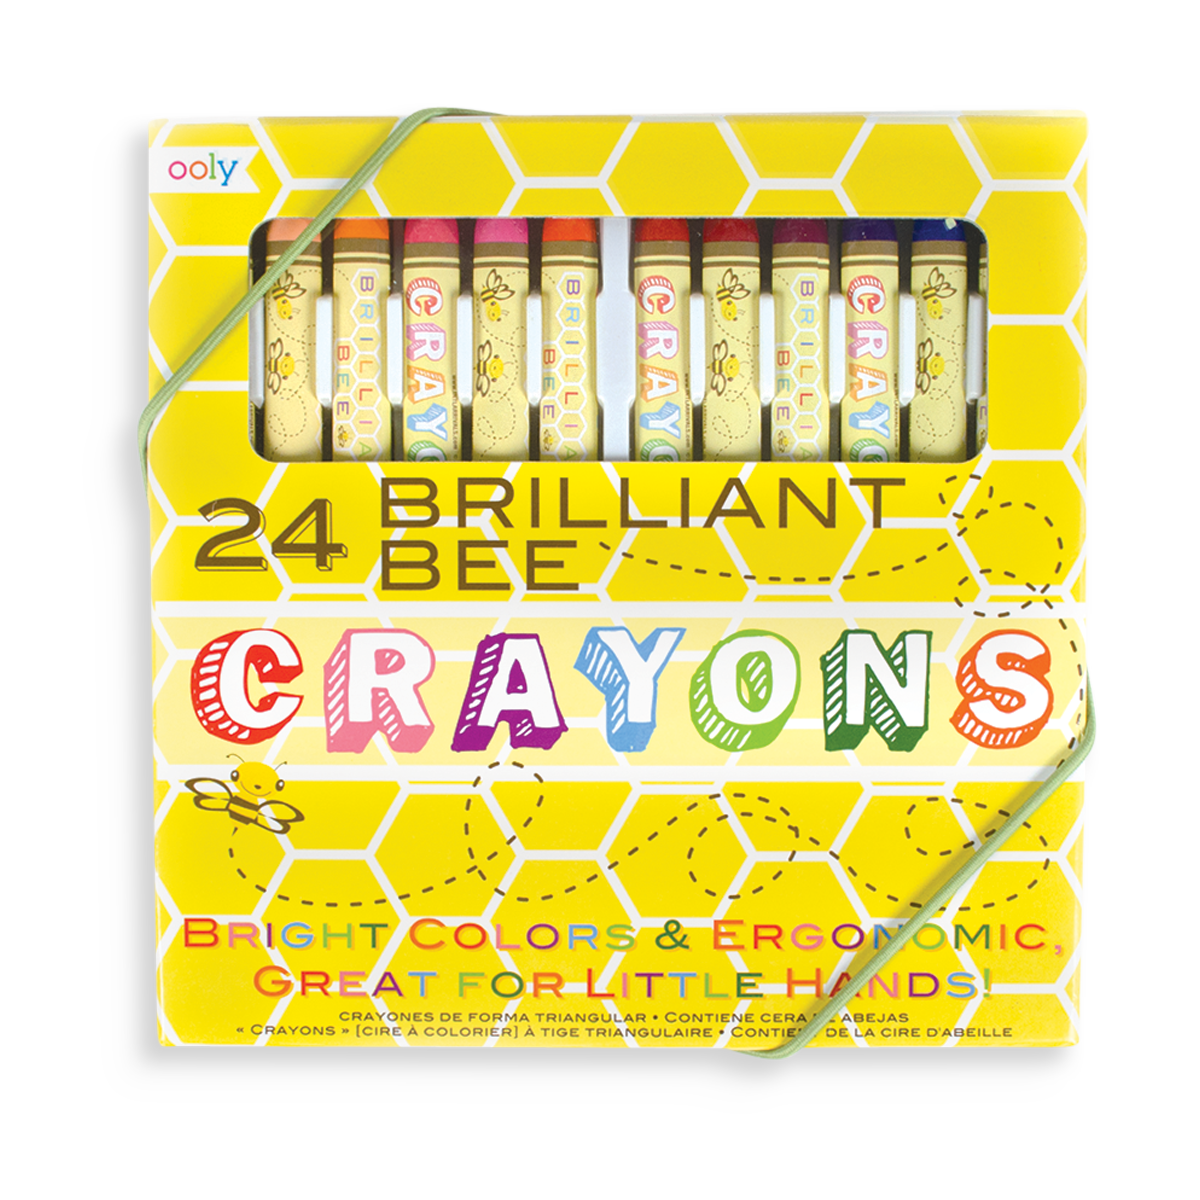 Cat Parade Gel Crayons - Mudpuddles Toys and Books